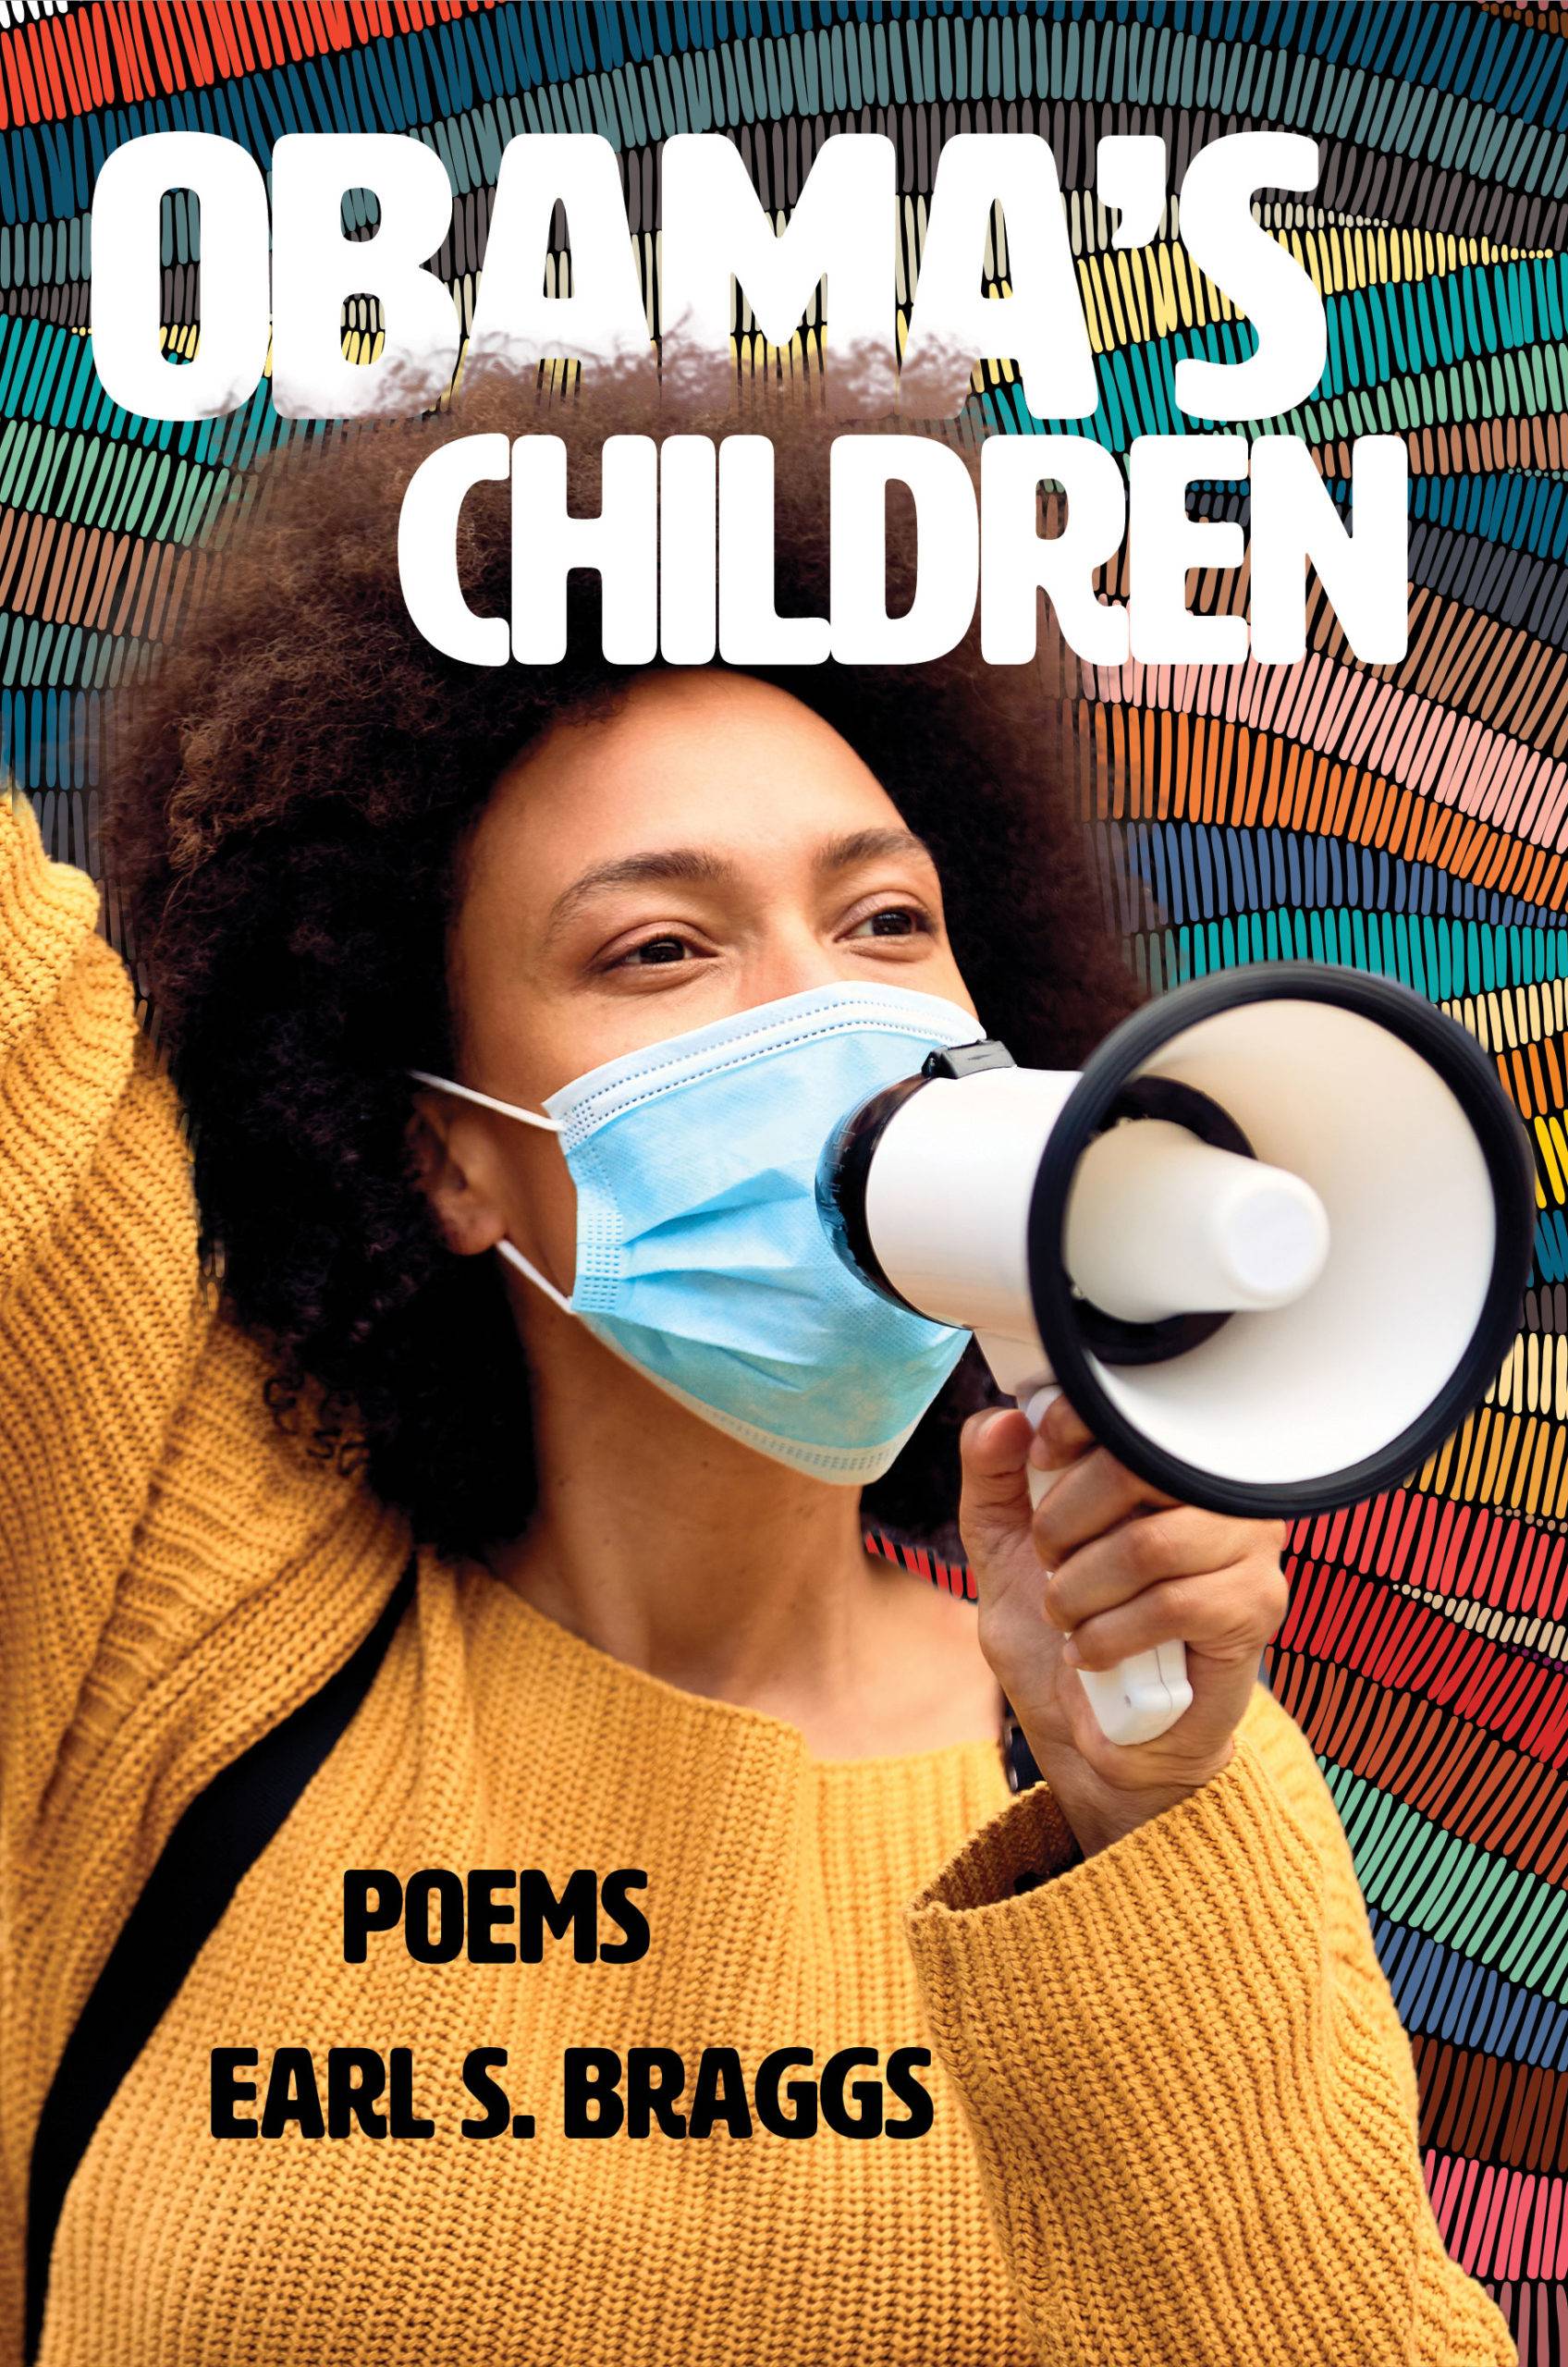 Obama's Children: Poems by Earl S. Braggs. A young woman in a yellow sweater wearing a mask holds a megaphone. She is superimposed over a colorful background